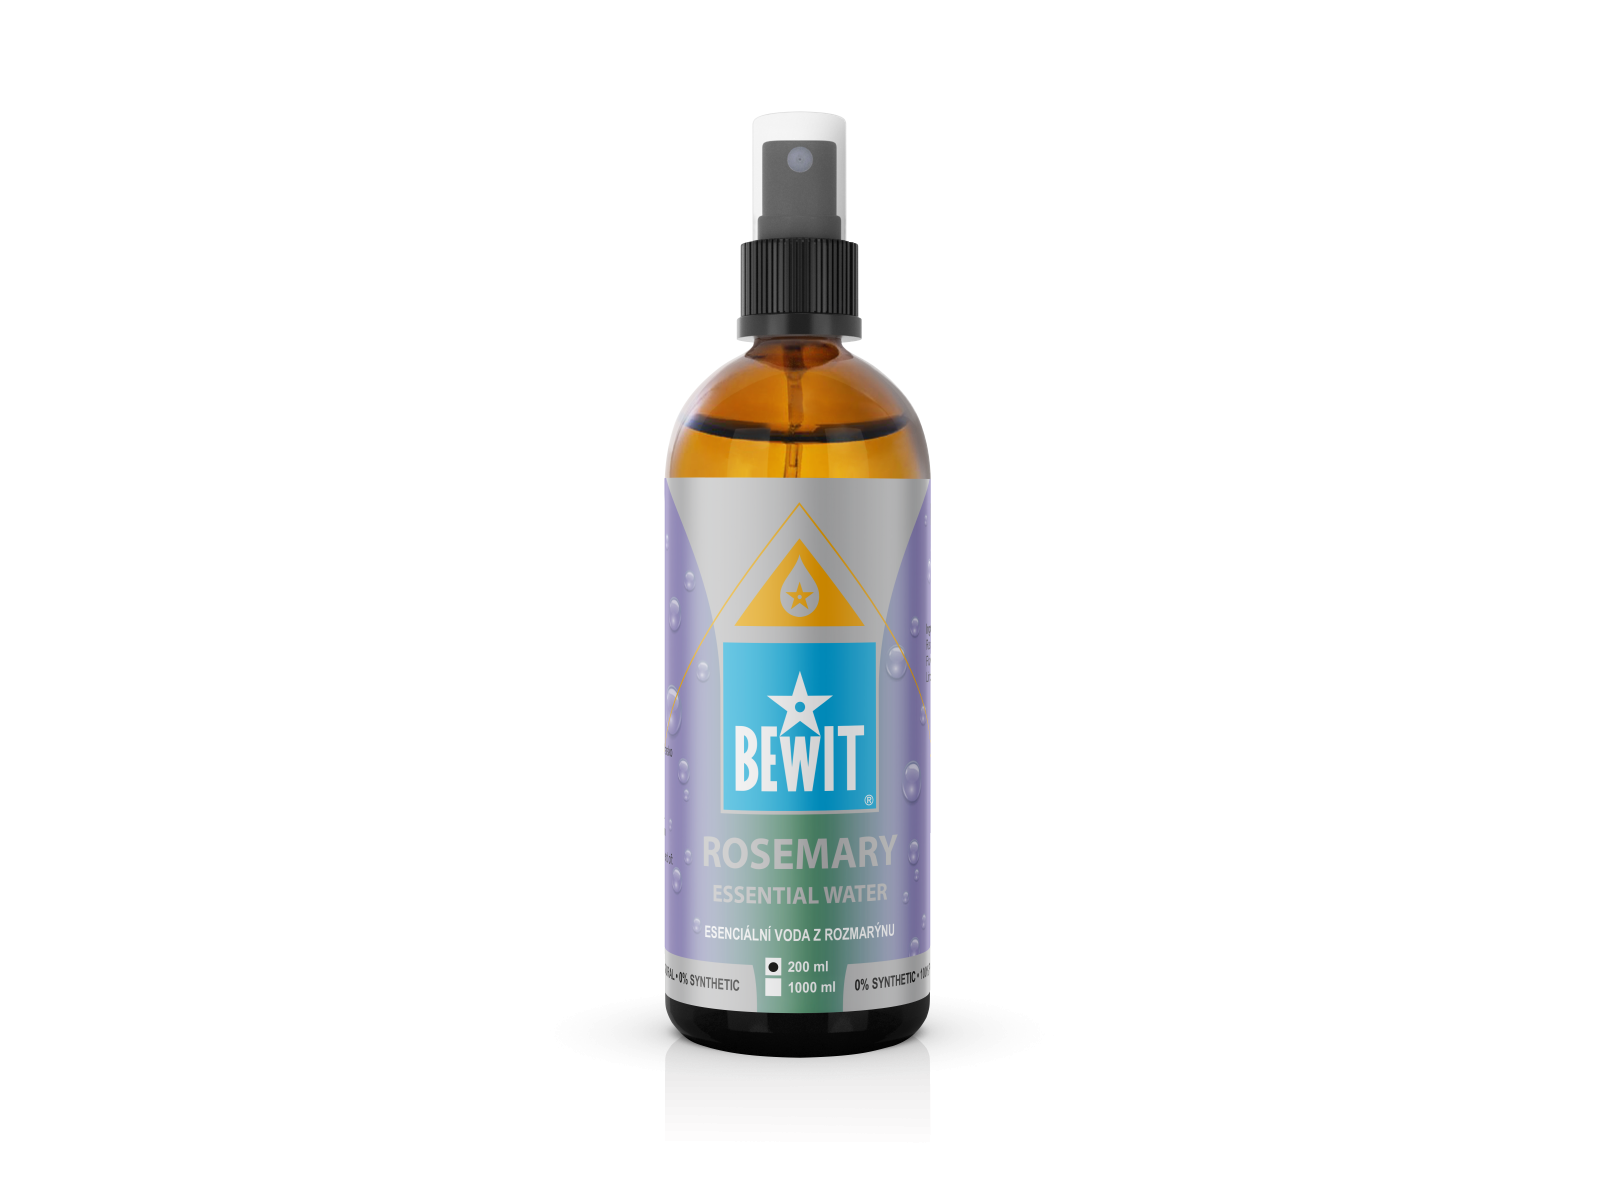 Rosemary essential water - 100% NATURAL HYDROLYTE